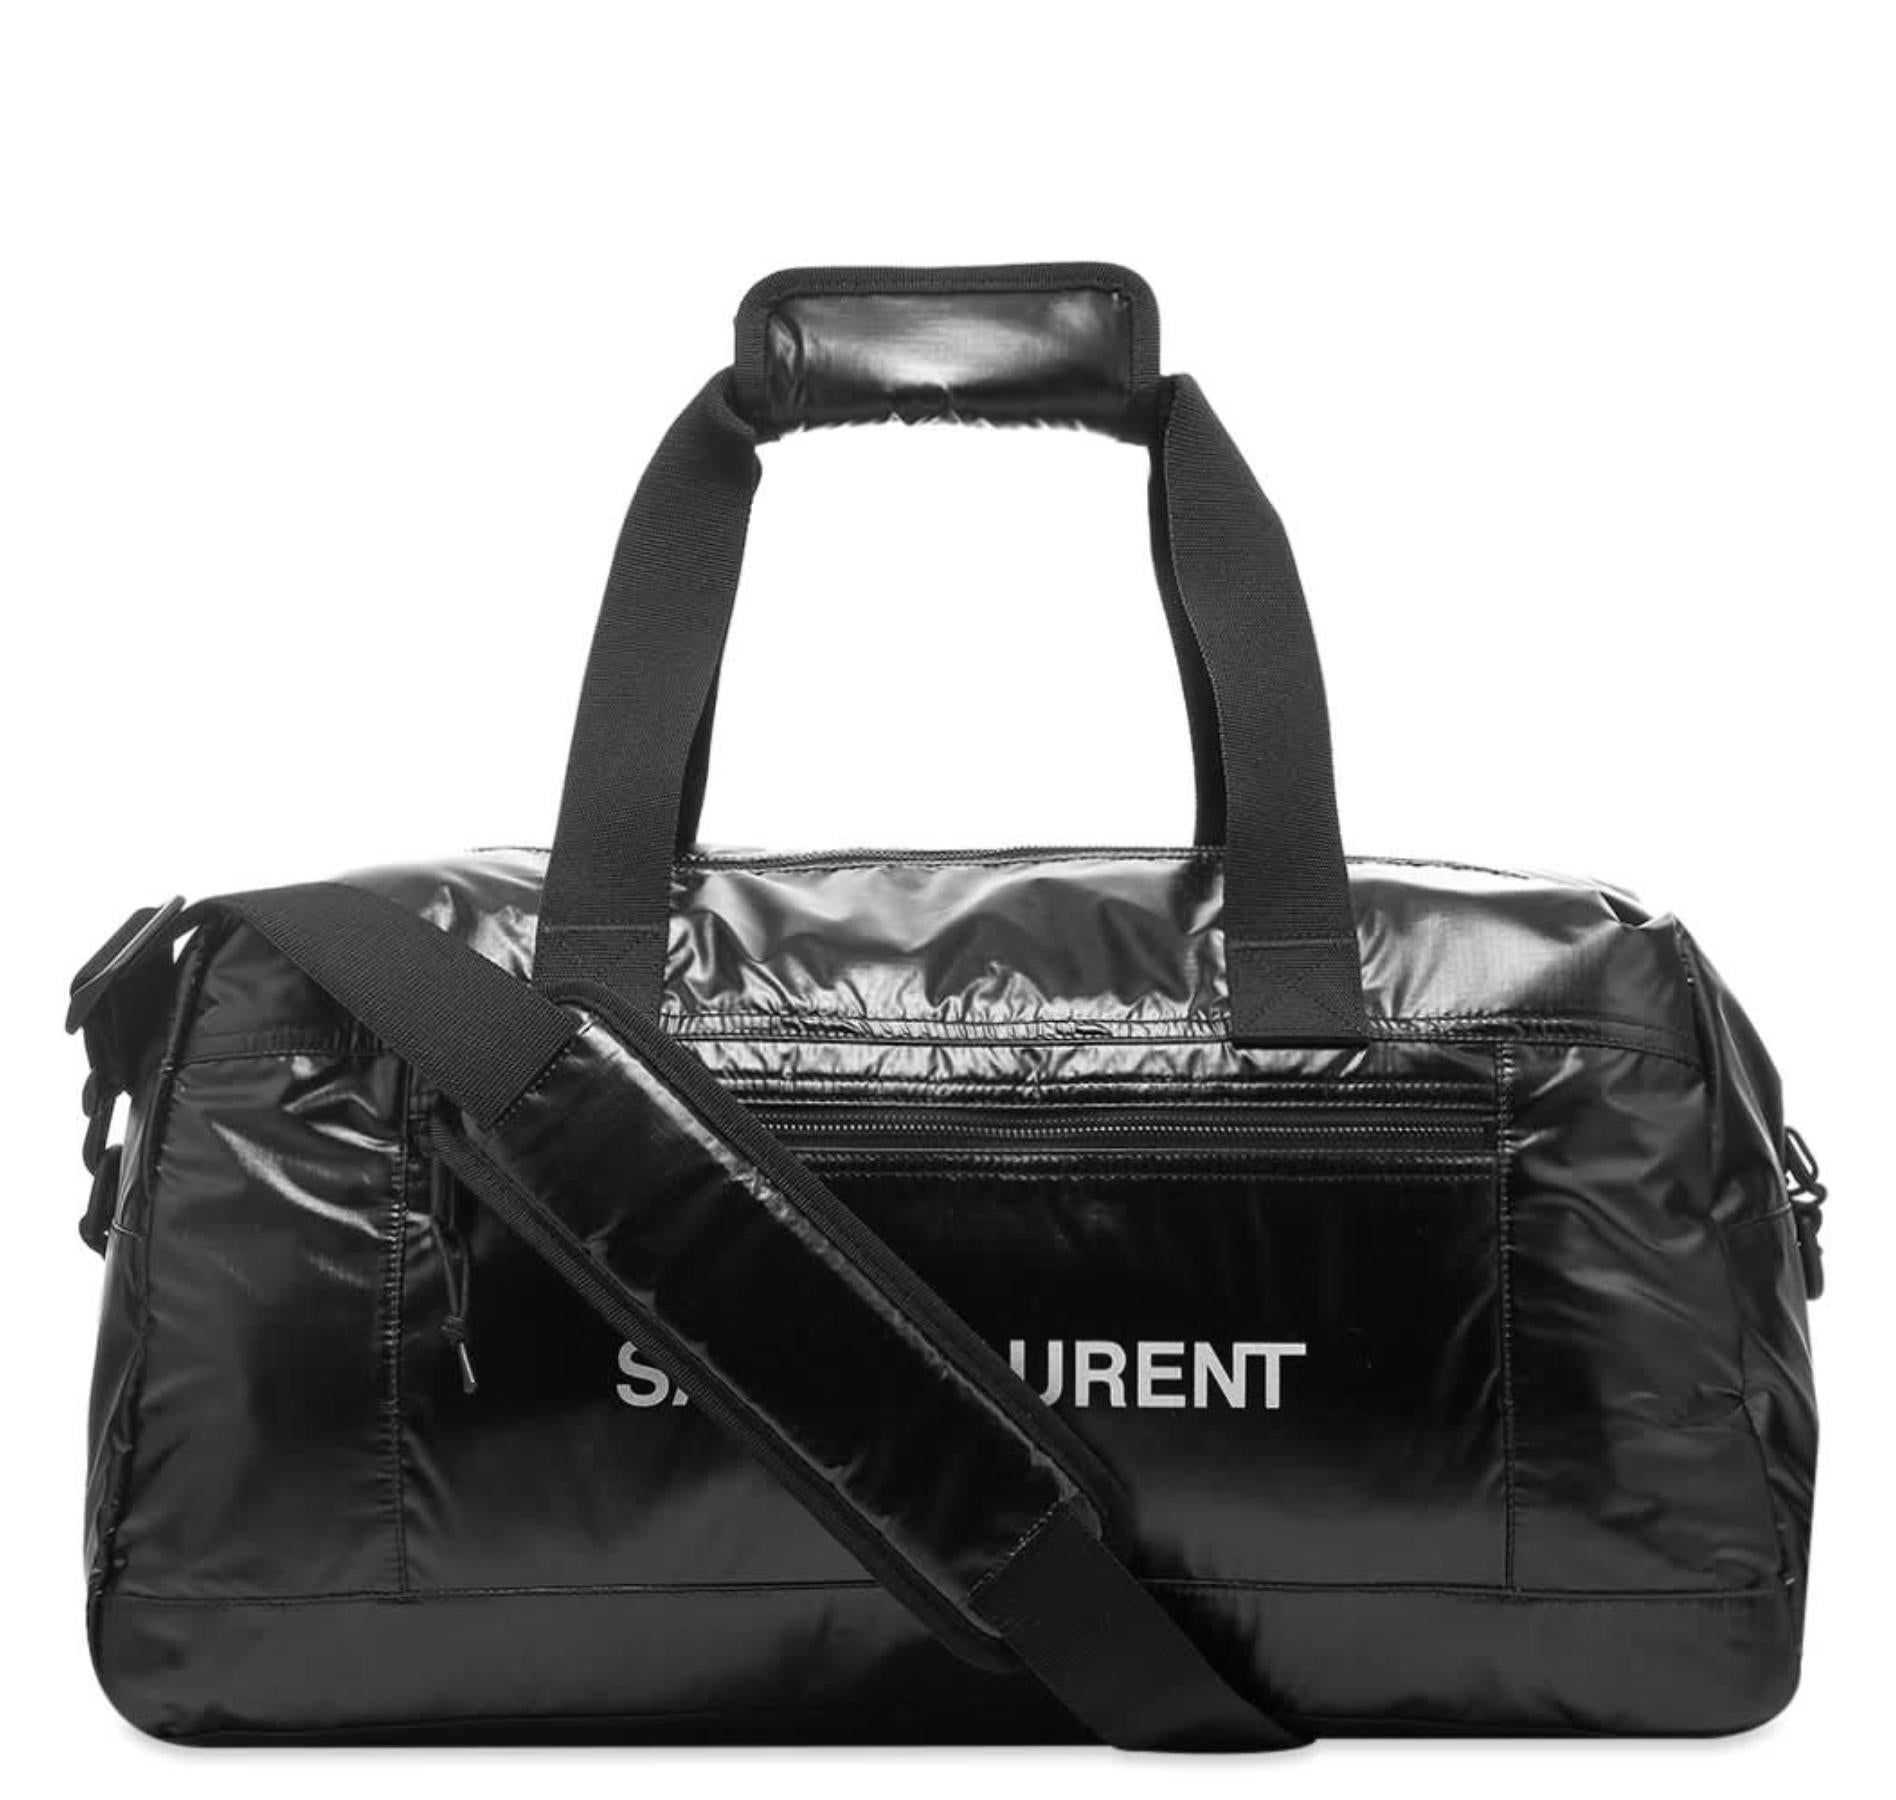 Saint Laurent NUXX Ripstop Black Nylon Duffel Bag / Travel Bag

Take Saint Laurent's sleek Parisian style on the move with this glossy black duffle bag. It’s constructed from a durable ripstop and printed with the label’s logo in bright contrasting